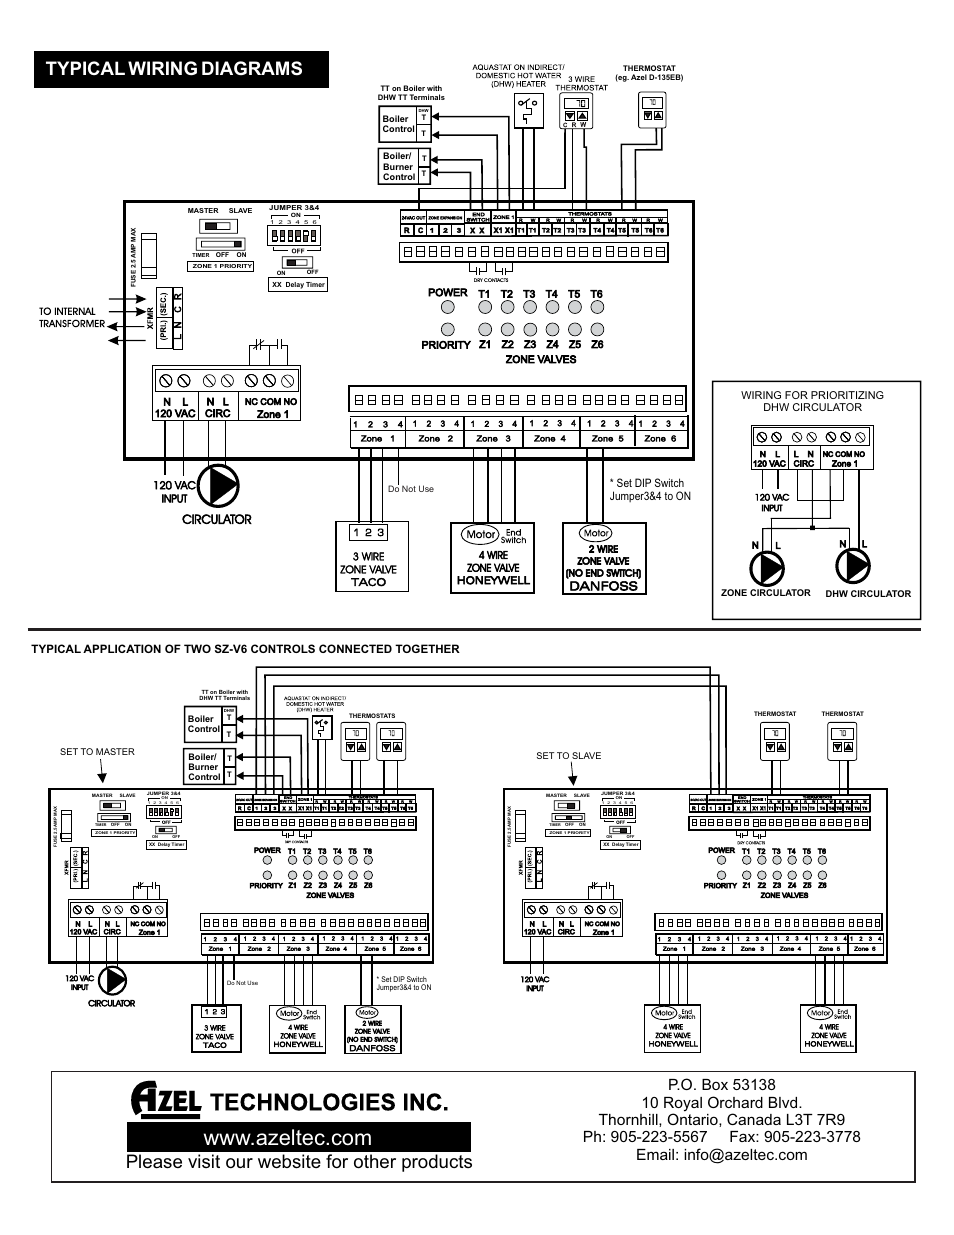 Technologies Inc  Typical Wiring Diagrams  Please Visit